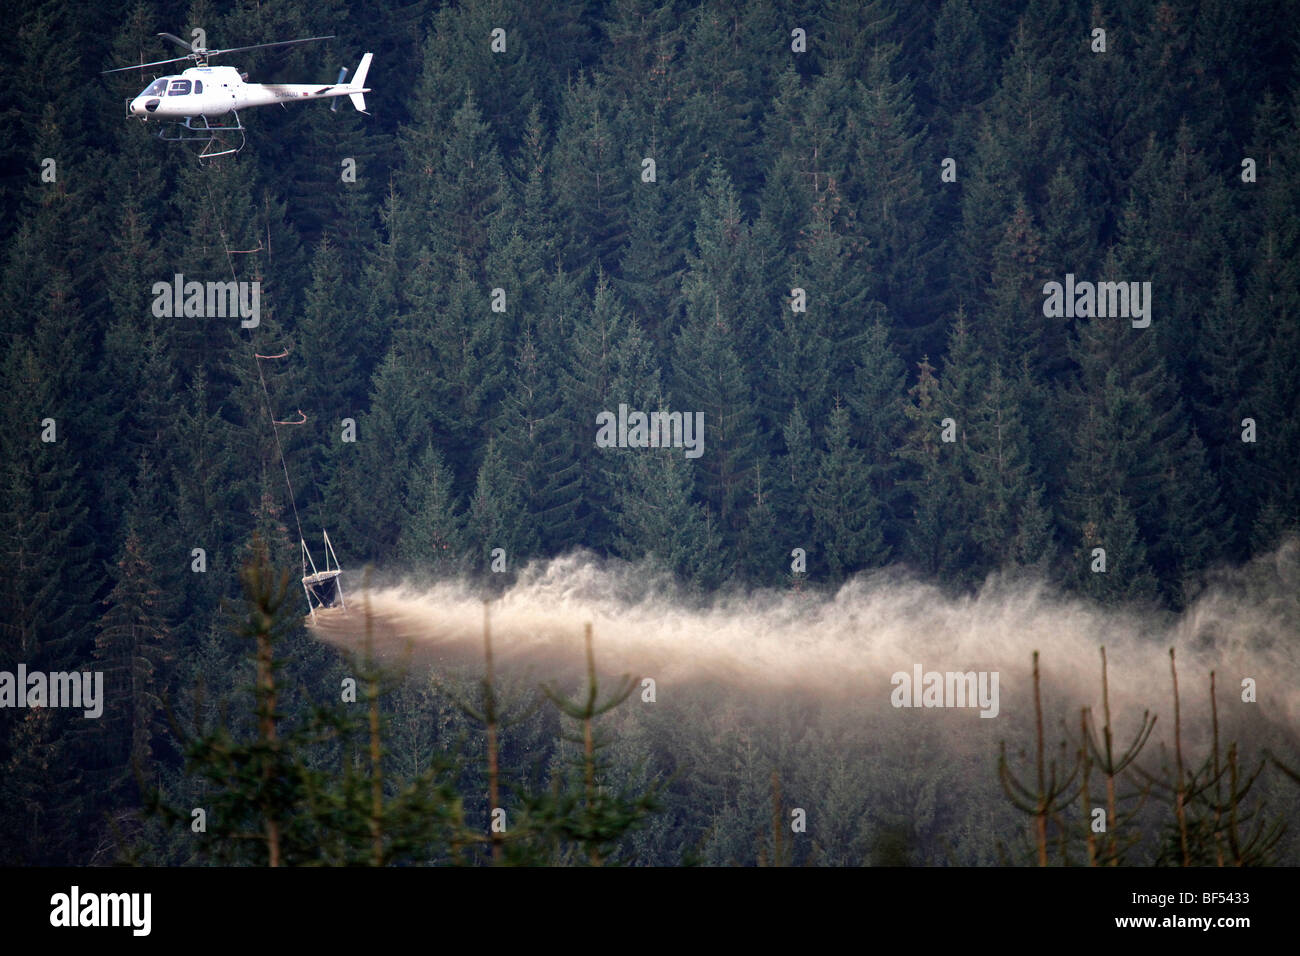 To prevent acidification of the forest floor, the forest is sprayed with lime by helicopter, Oberhof, Thuringia, Germany, Europe Stock Photo